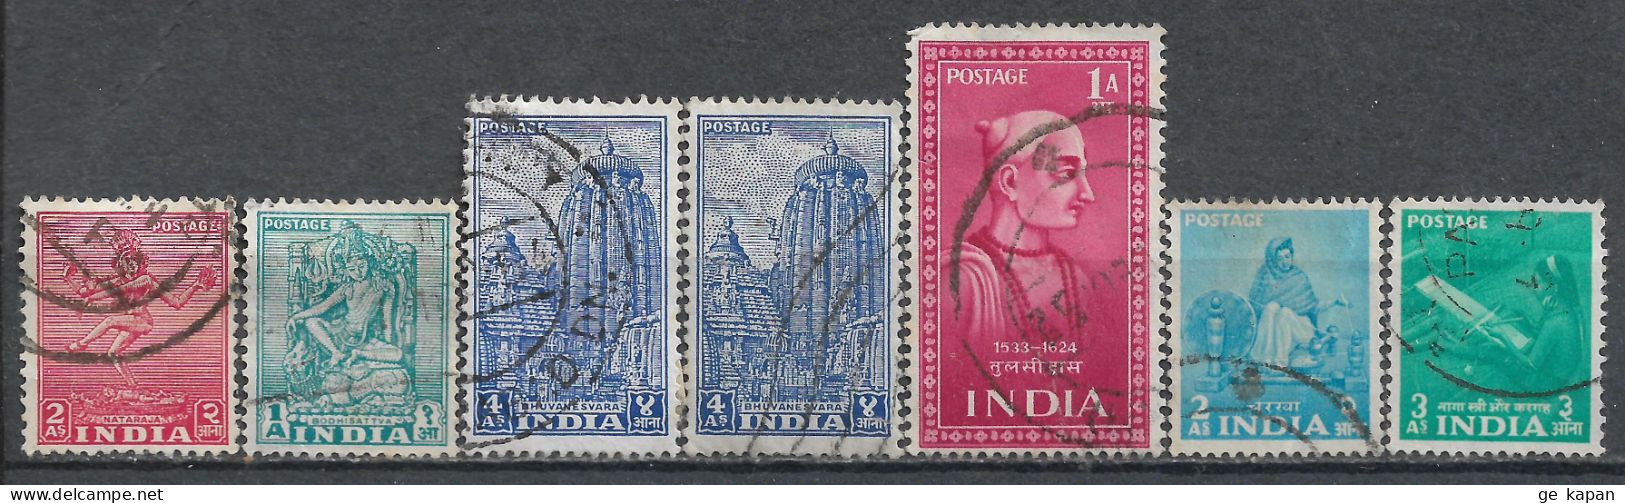 1949-1955 INDIA Set Of 7 Used Stamps (Michel # 195,215,217,222,242,243) - Gebraucht